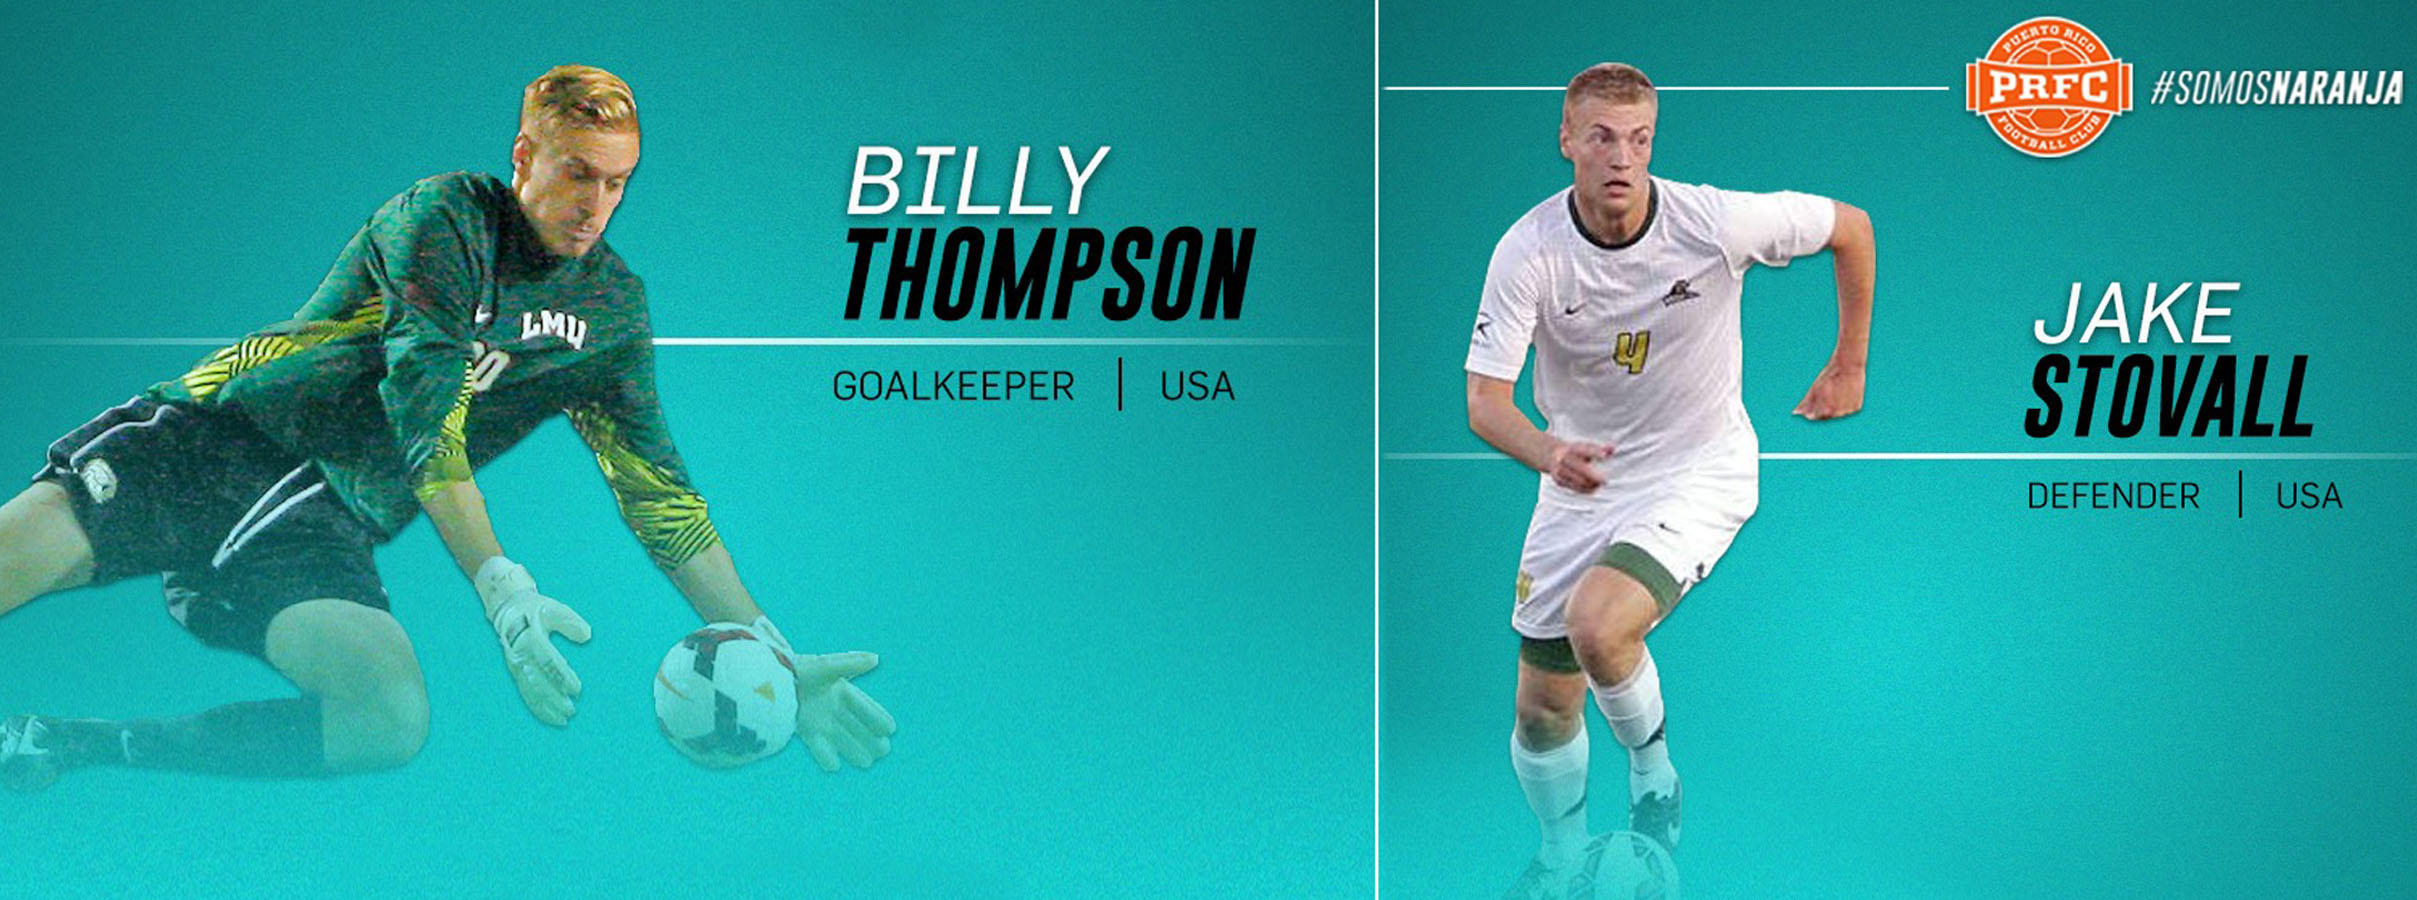 PRFC Firma a Billy Thompson y Jake Stovall